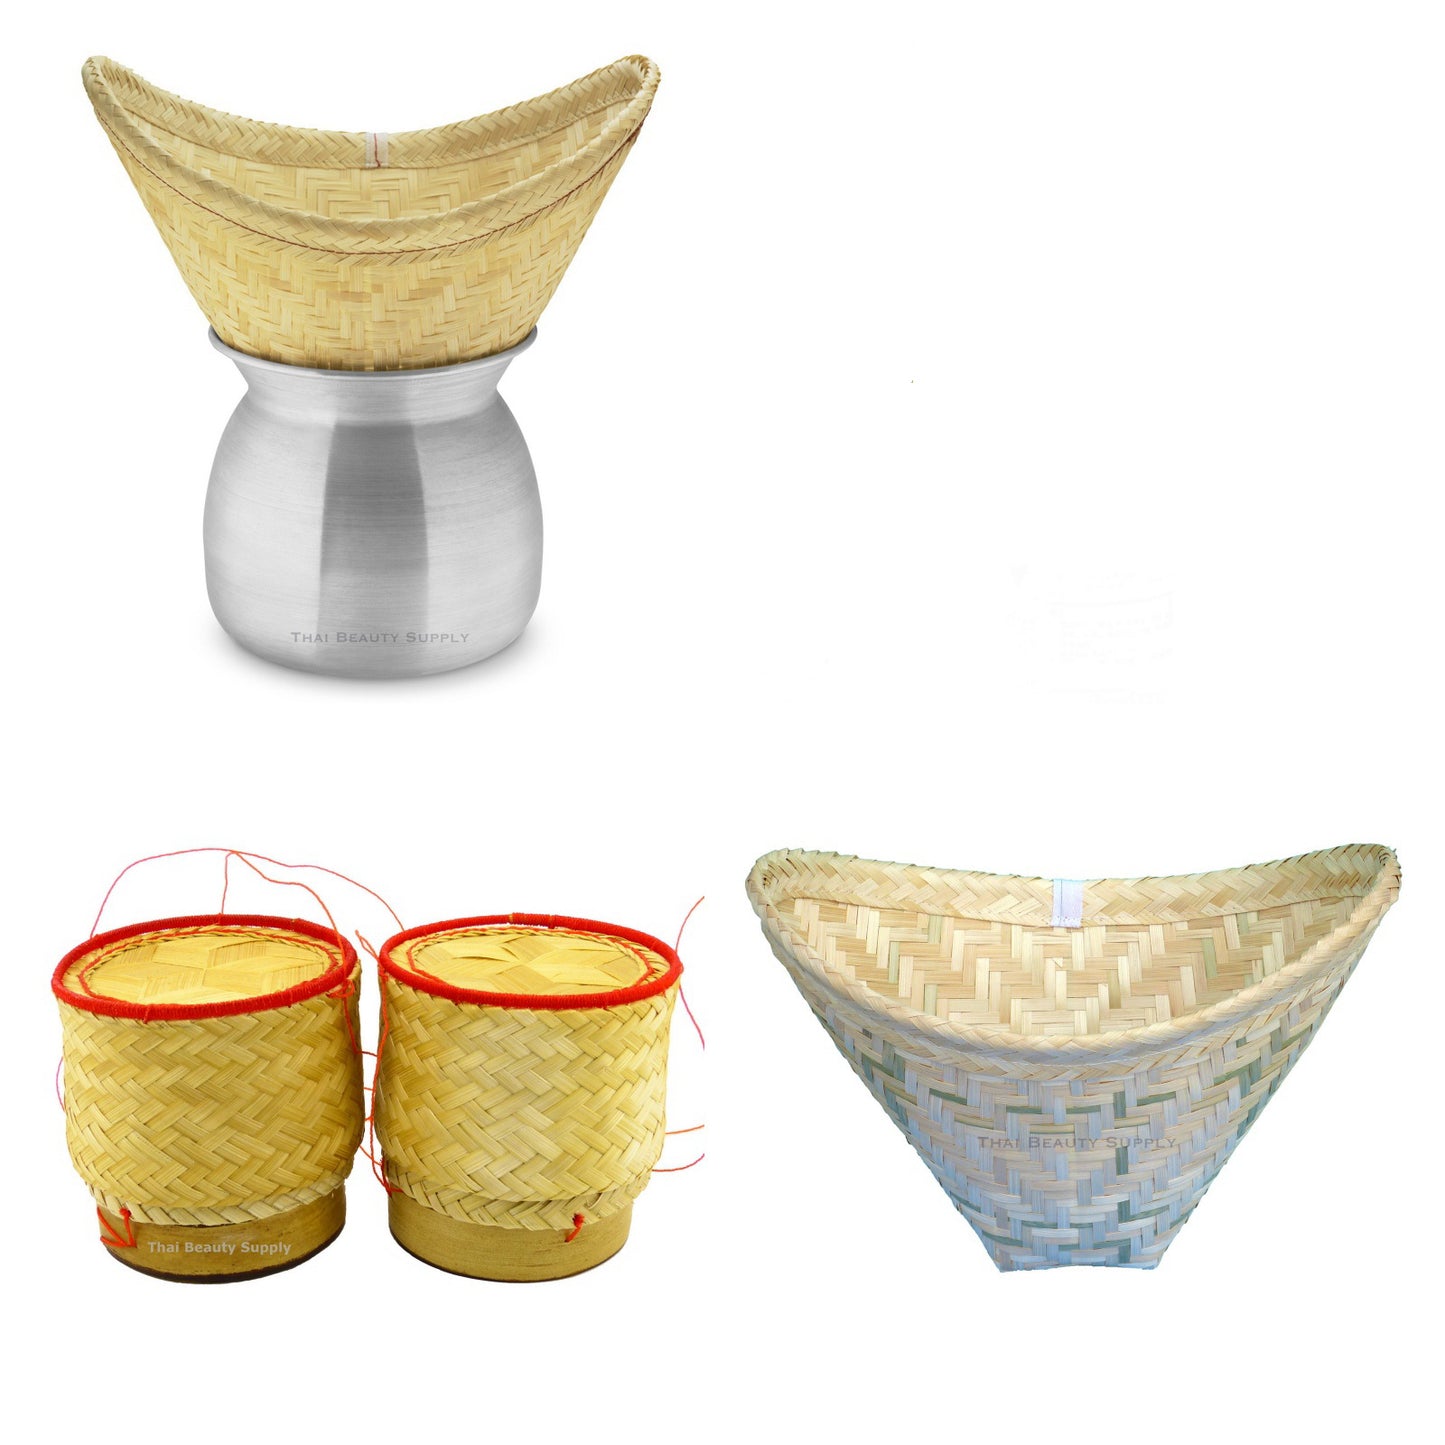 Aluminum Sticky Rice Steamer Set with 2 Bamboo Serving Baskets - Asian Beauty Supply